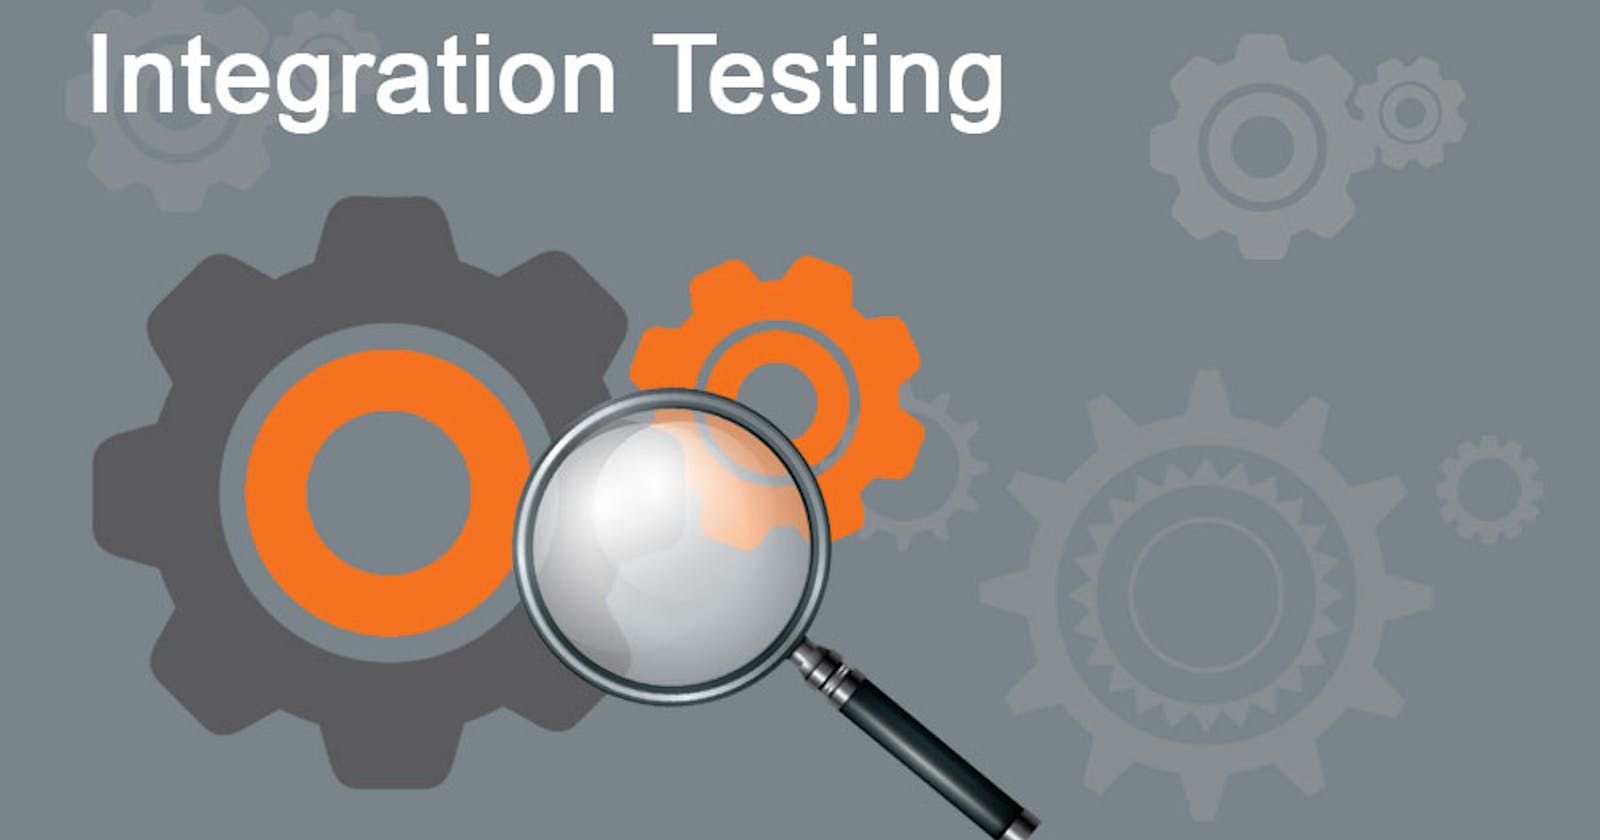 Day 3 Overview: Testing Practices + Integration Tests